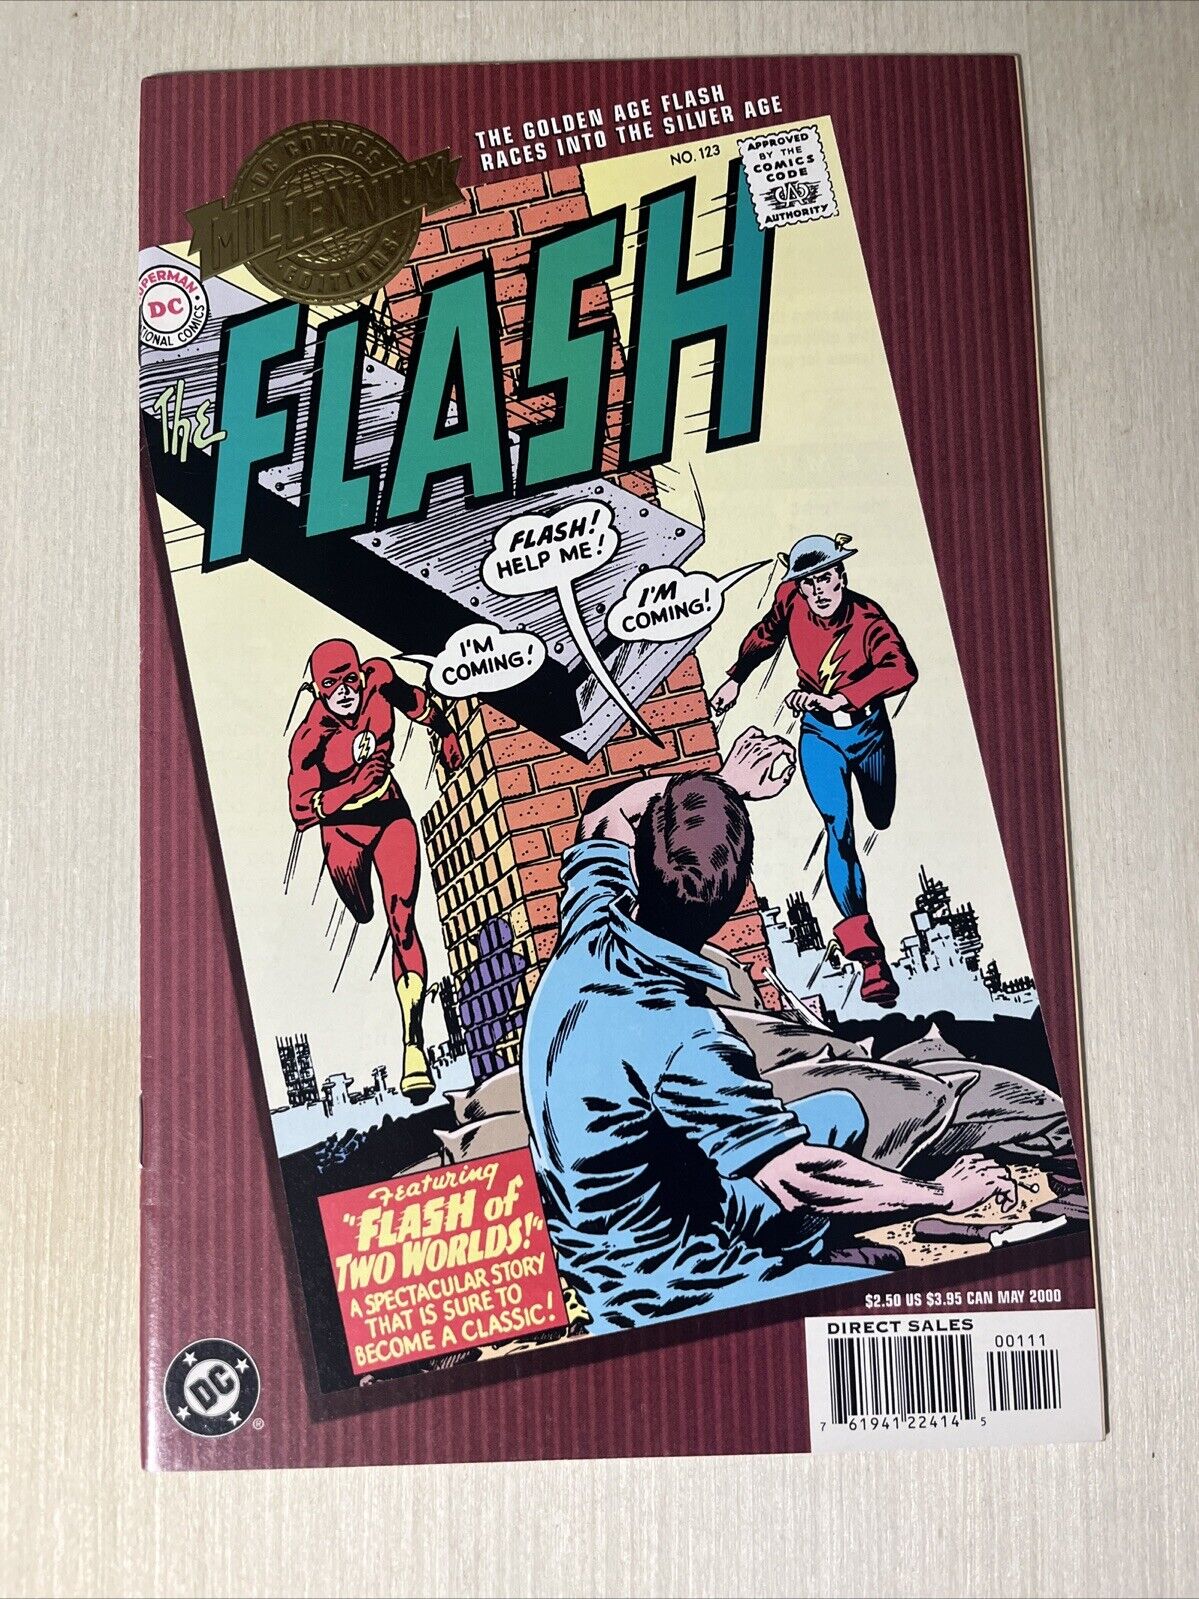 Millennium Edition Flash #123 (2000, DC) Reprint Flash Of Two Worlds